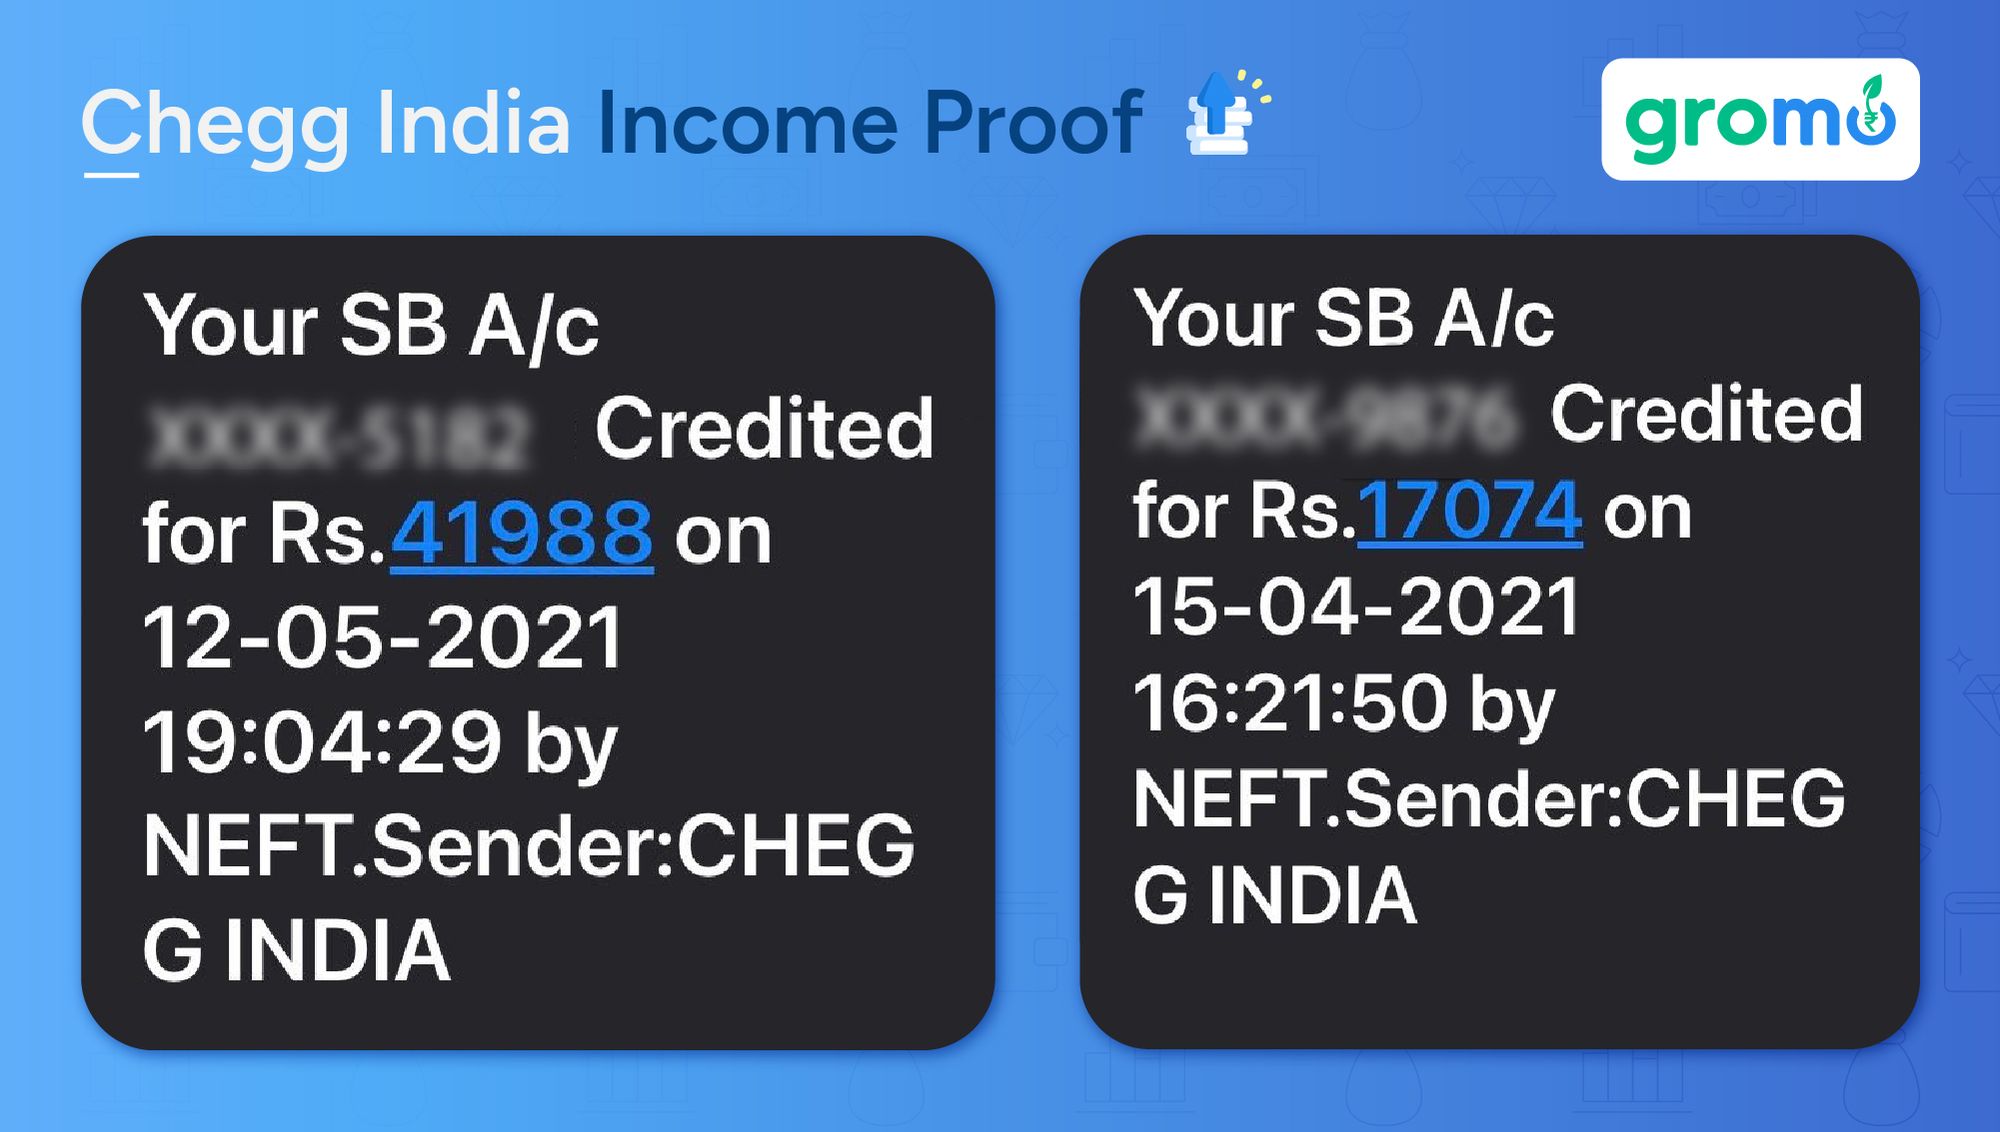 Chegg India Income Proof - Best Ways to Make Money Online - GroMo